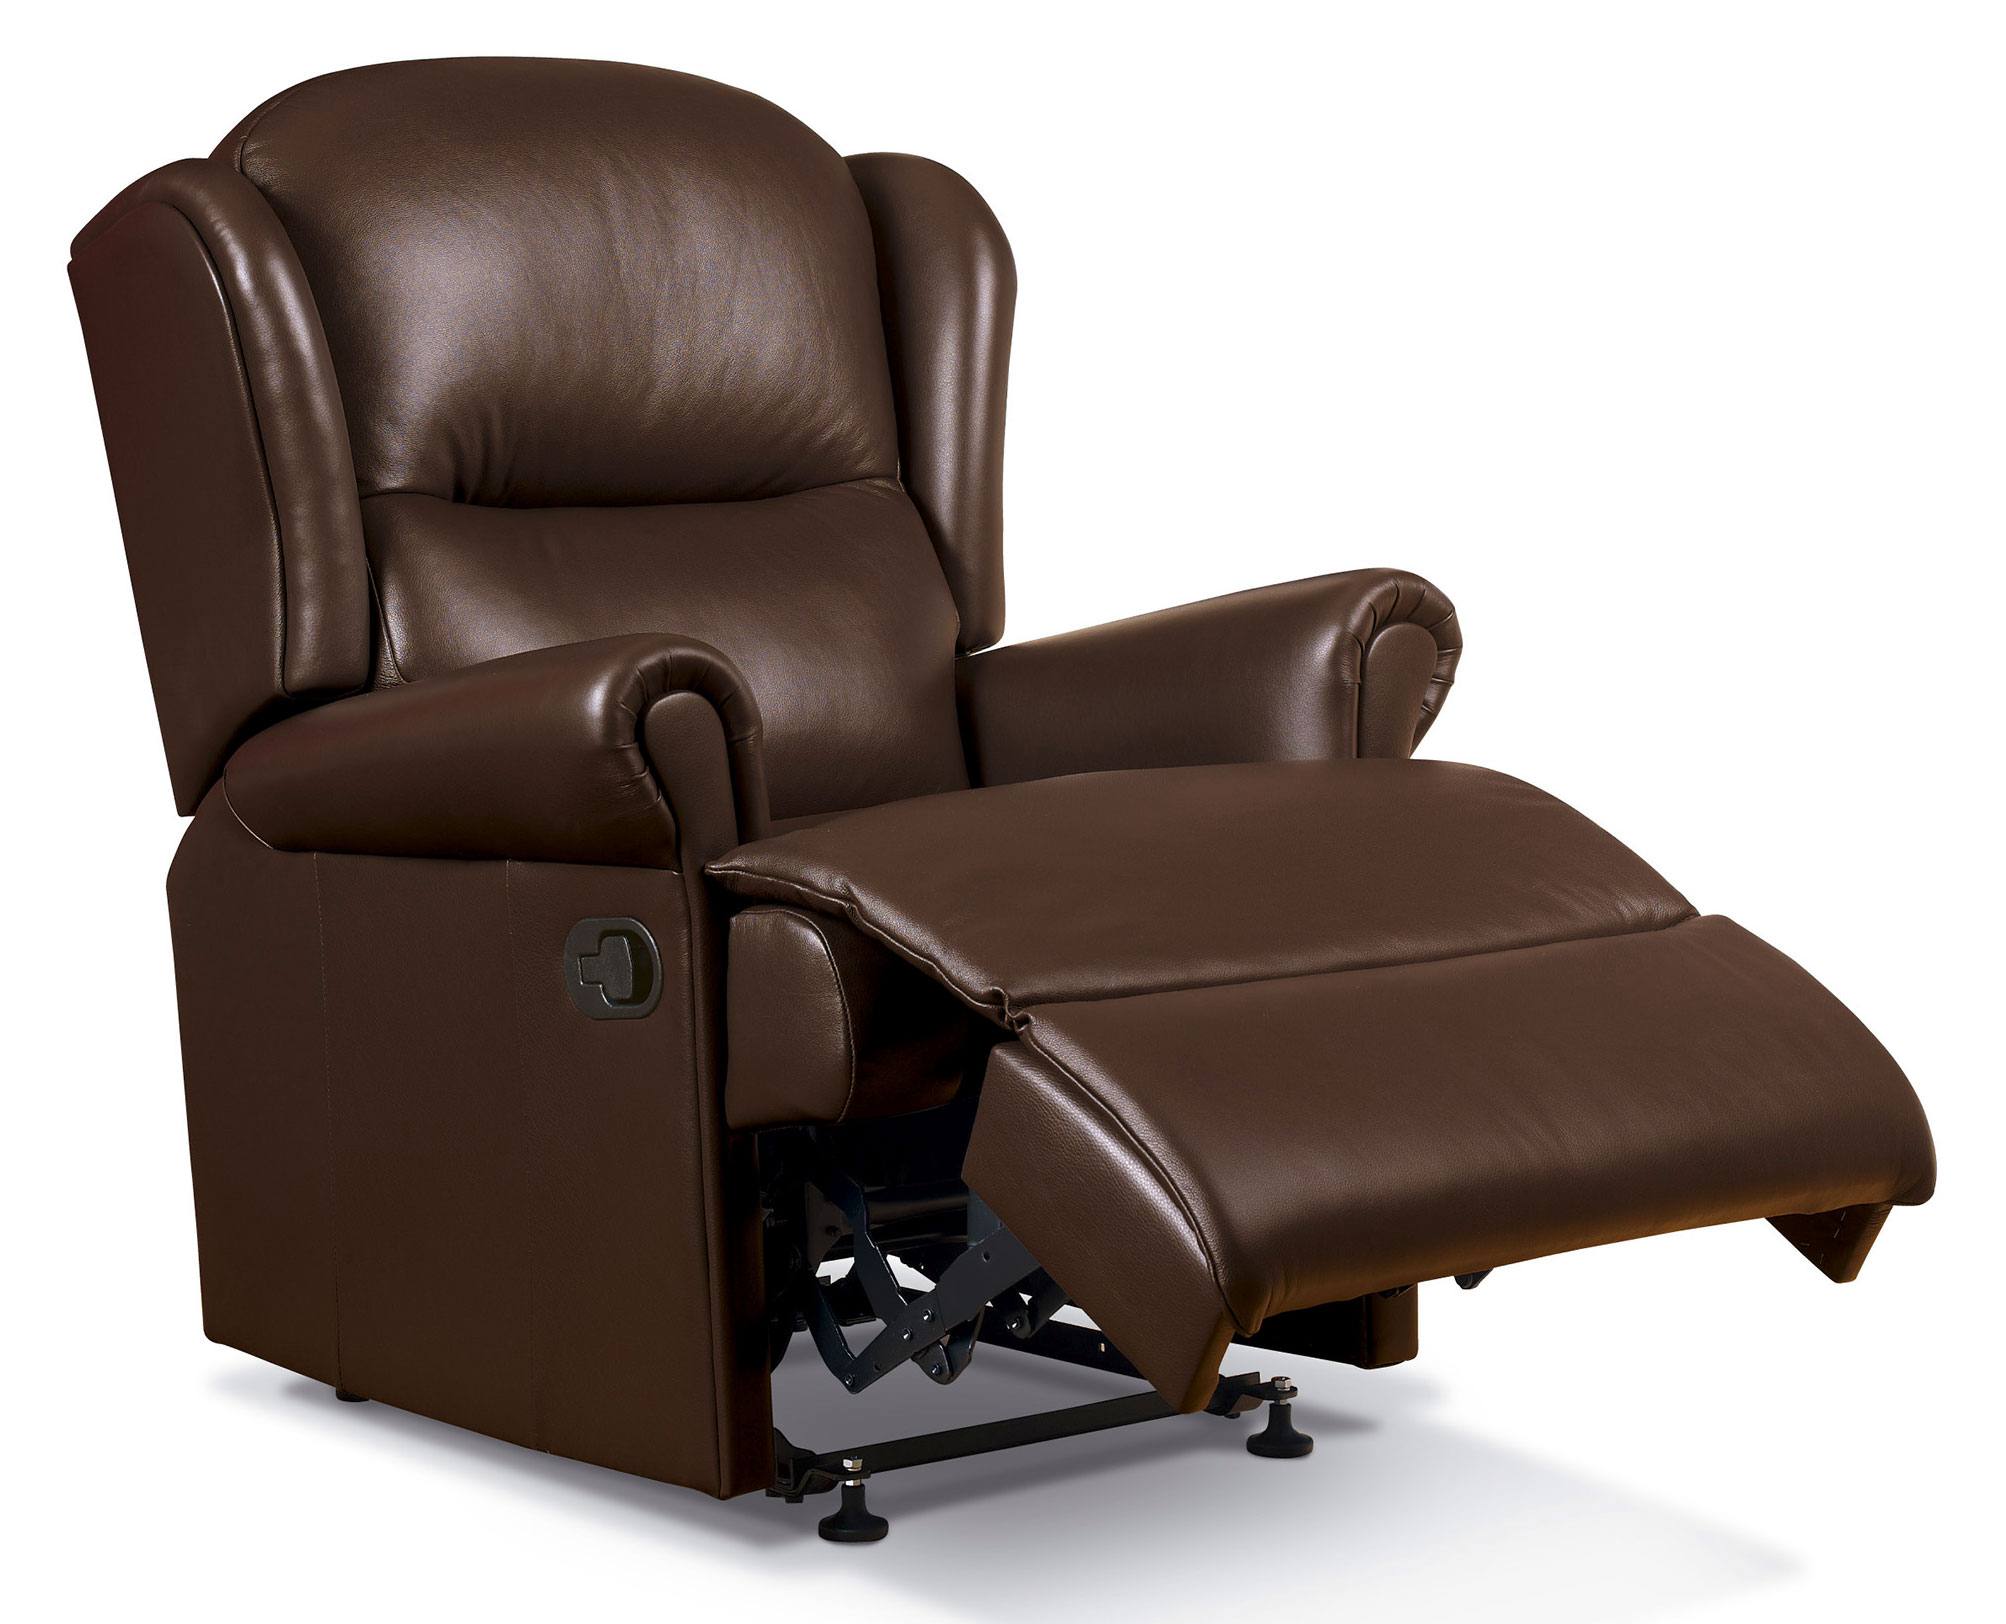 sherborne recliner chair reviews